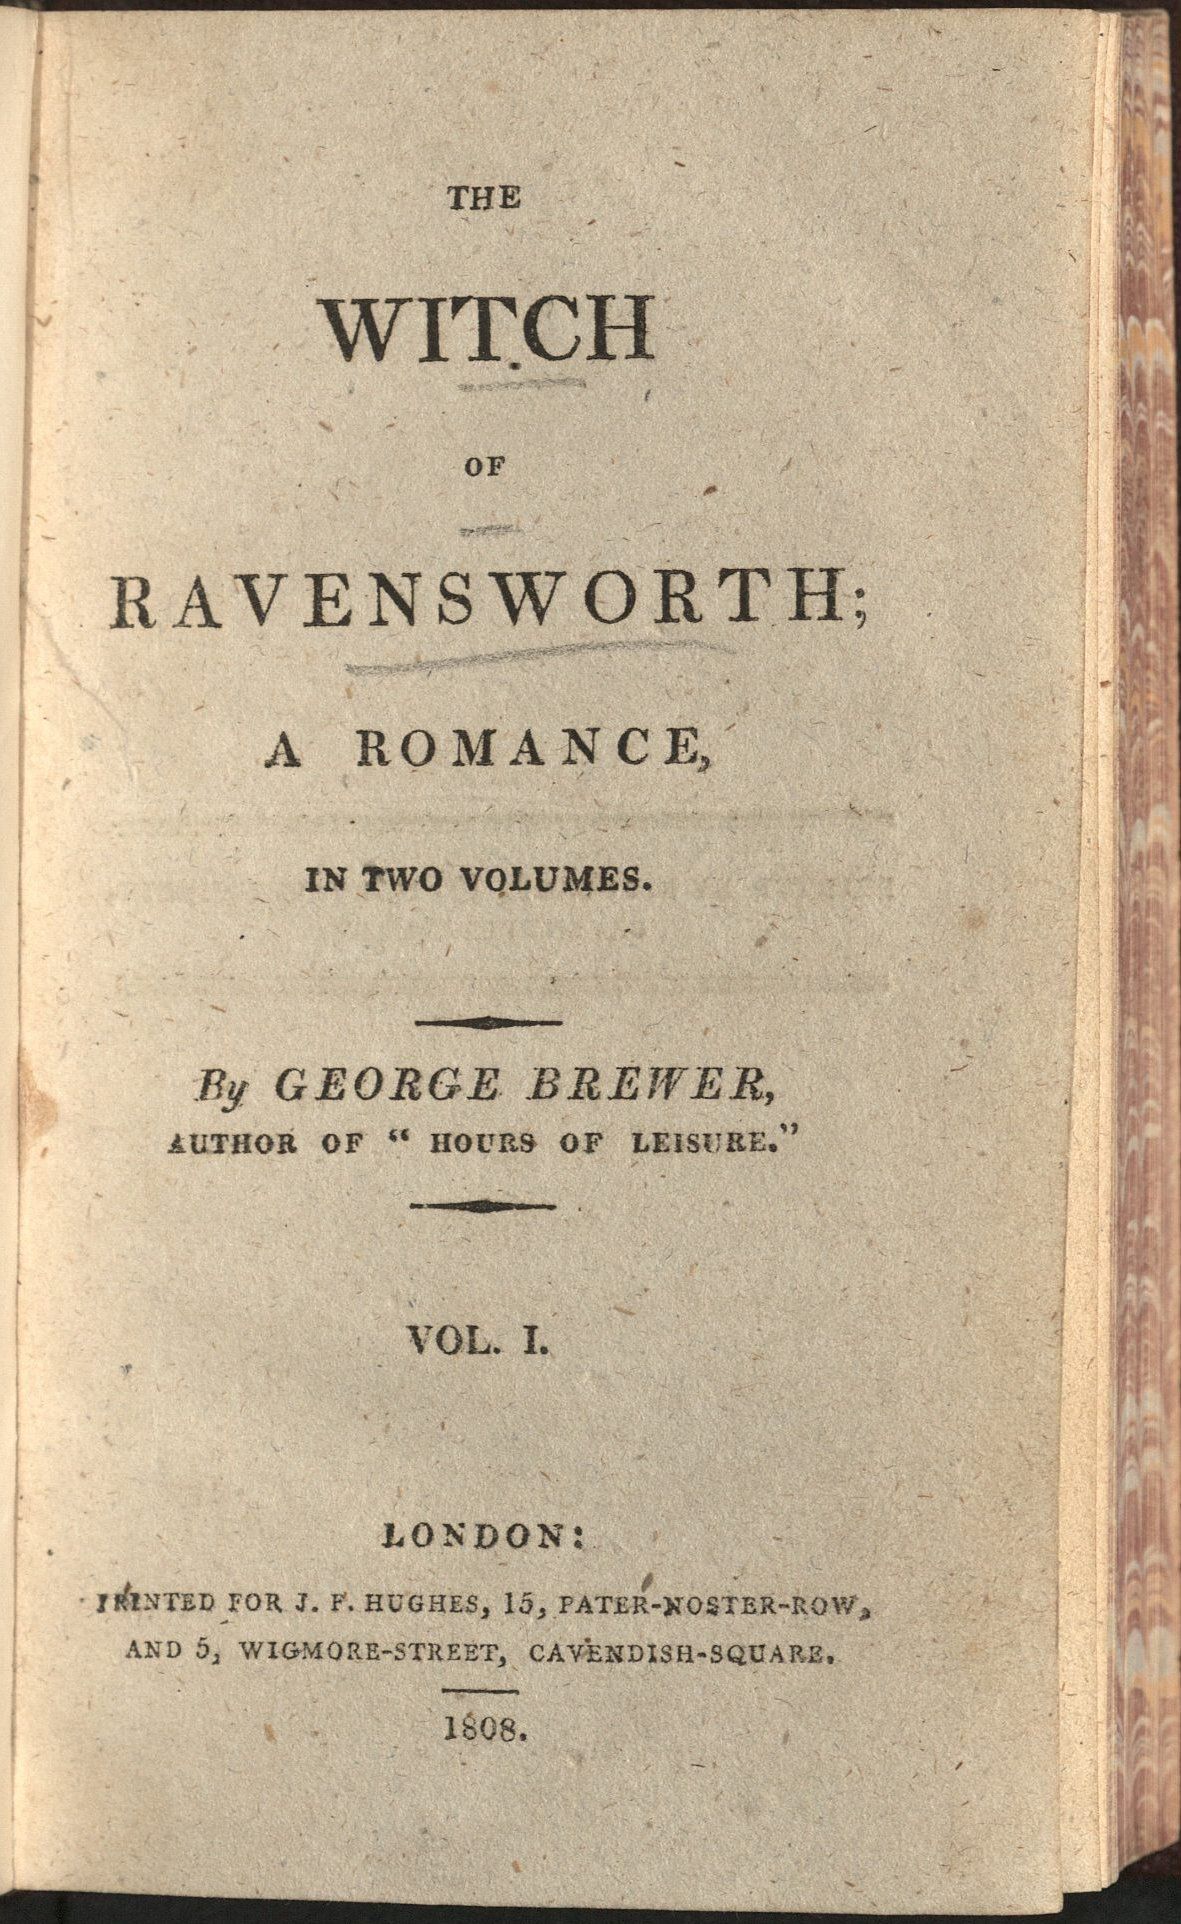 This image is of the title page of volume one of The Witch of Ravensworth. It includes the full title in large font, the author, the volume number, and the publishing information. The title is underlined in pencil.